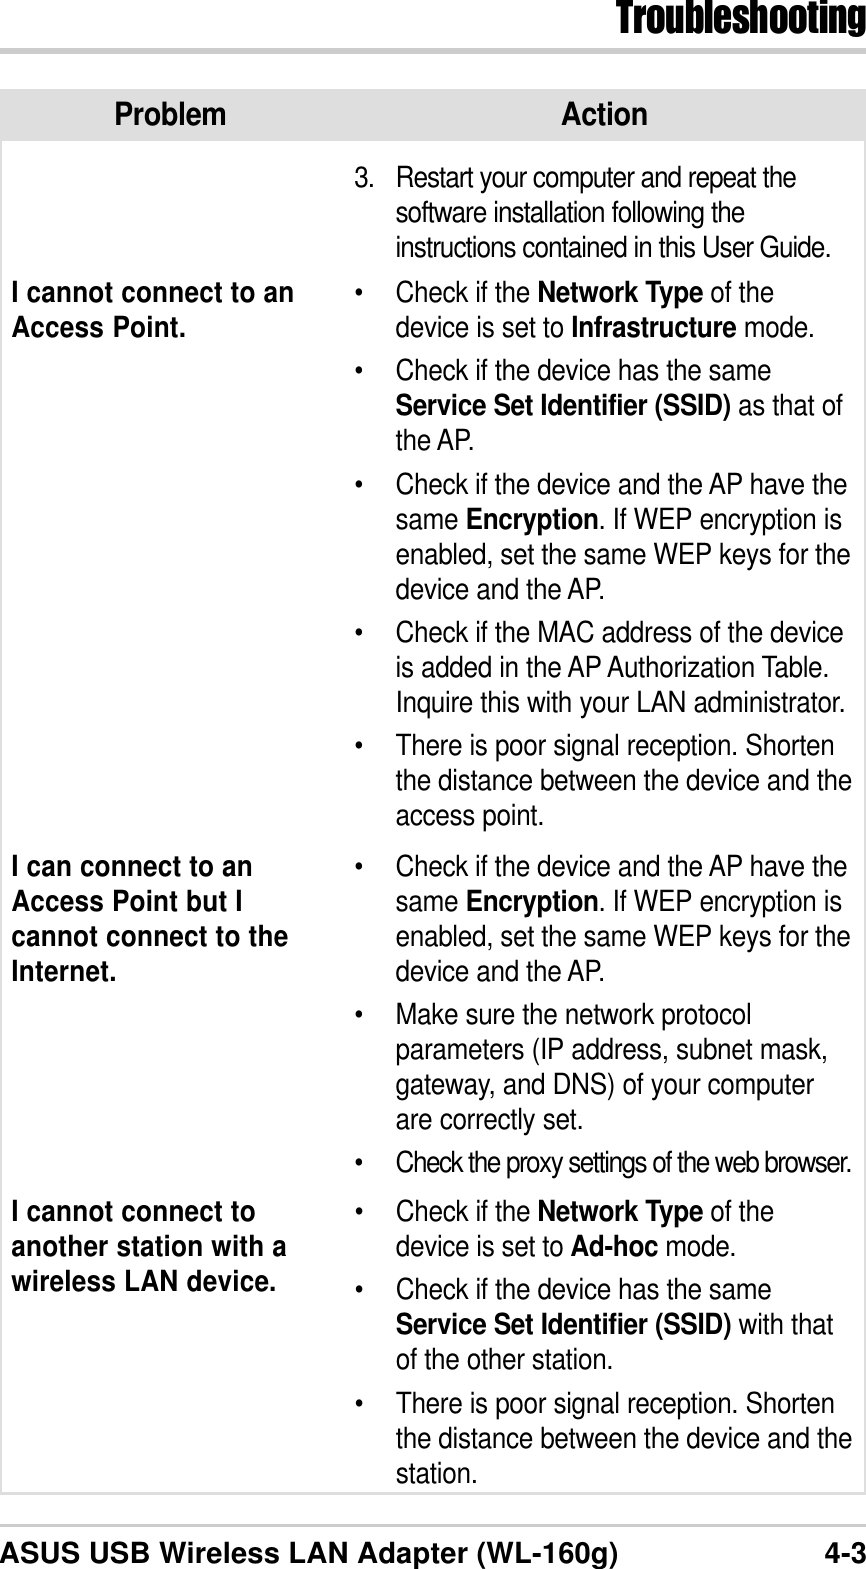 4-3TroubleshootingASUS USB Wireless LAN Adapter (WL-160g)3. Restart your computer and repeat thesoftware installation following theinstructions contained in this User Guide.I cannot connect to anAccess Point. •Check if the Network Type of thedevice is set to Infrastructure mode.•Check if the device has the sameService Set Identifier (SSID) as that ofthe AP.•Check if the device and the AP have thesame Encryption. If WEP encryption isenabled, set the same WEP keys for thedevice and the AP.•Check if the MAC address of the deviceis added in the AP Authorization Table.Inquire this with your LAN administrator.•There is poor signal reception. Shortenthe distance between the device and theaccess point.I can connect to anAccess Point but Icannot connect to theInternet.•Check if the device and the AP have thesame Encryption. If WEP encryption isenabled, set the same WEP keys for thedevice and the AP.•Make sure the network protocolparameters (IP address, subnet mask,gateway, and DNS) of your computerare correctly set.•Check the proxy settings of the web browser.Problem ActionI cannot connect toanother station with awireless LAN device.•Check if the Network Type of thedevice is set to Ad-hoc mode.•Check if the device has the sameService Set Identifier (SSID) with thatof the other station.•There is poor signal reception. Shortenthe distance between the device and thestation.